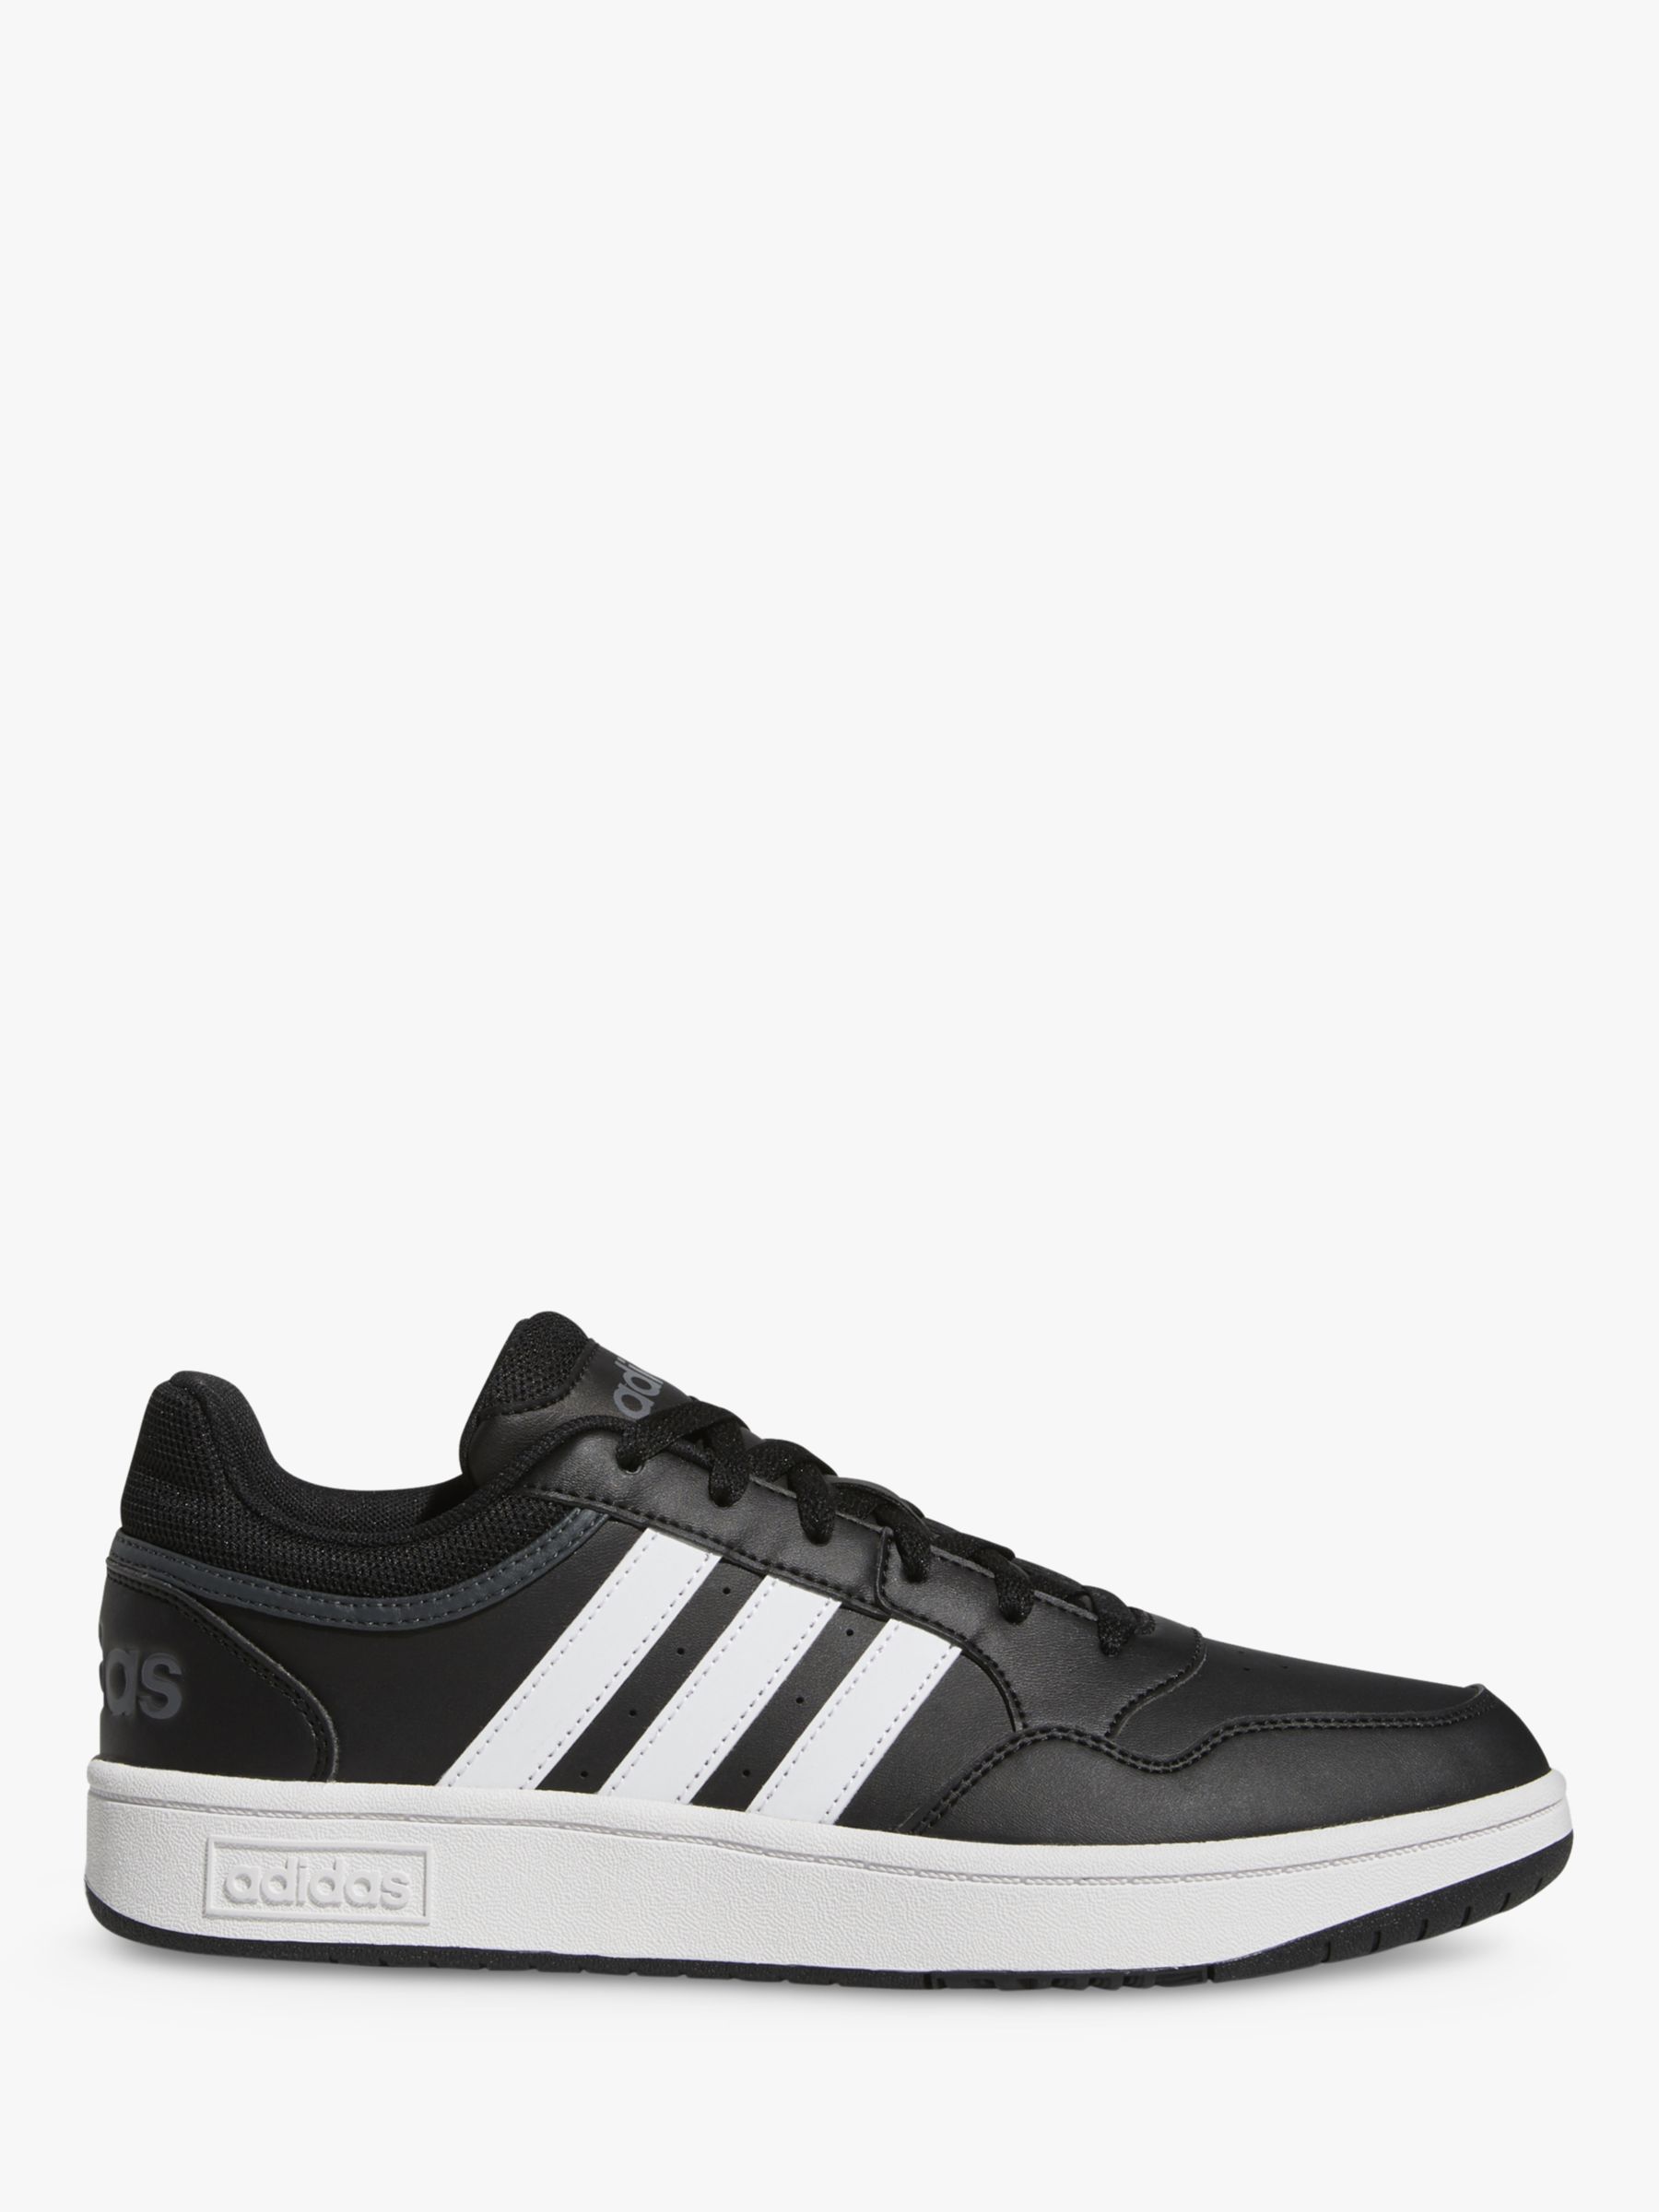 adidas Hoops 3.0 Men's Trainers, Black/White, 9